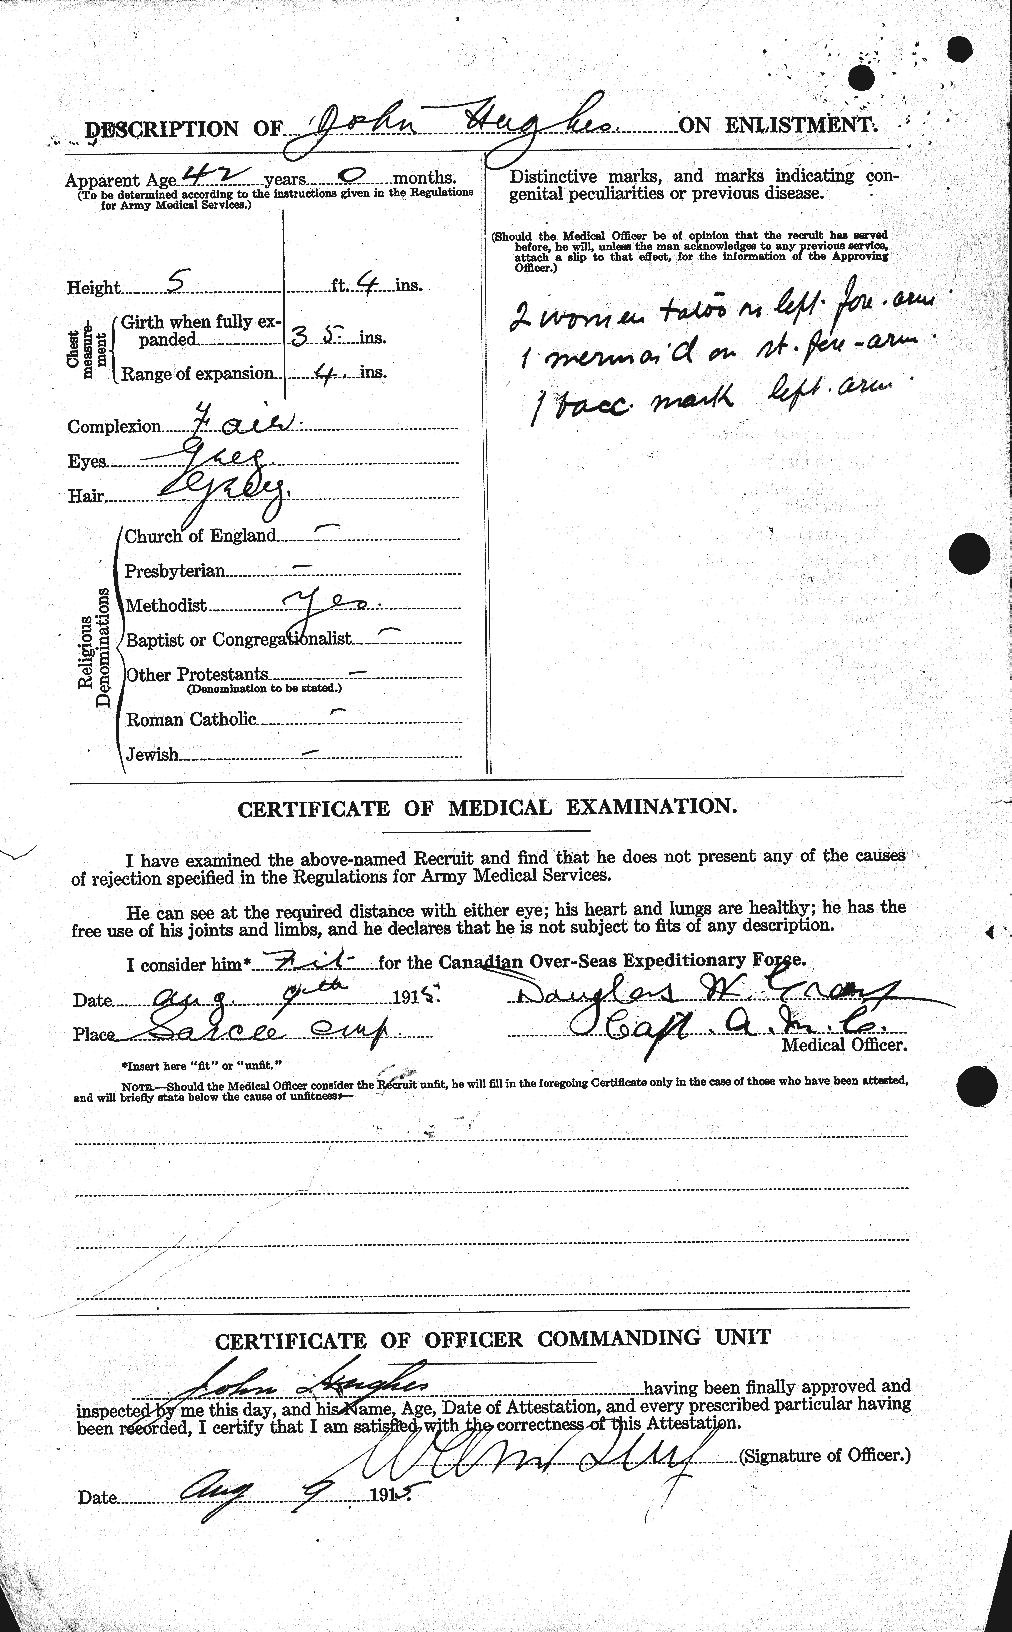 Personnel Records of the First World War - CEF 403988b